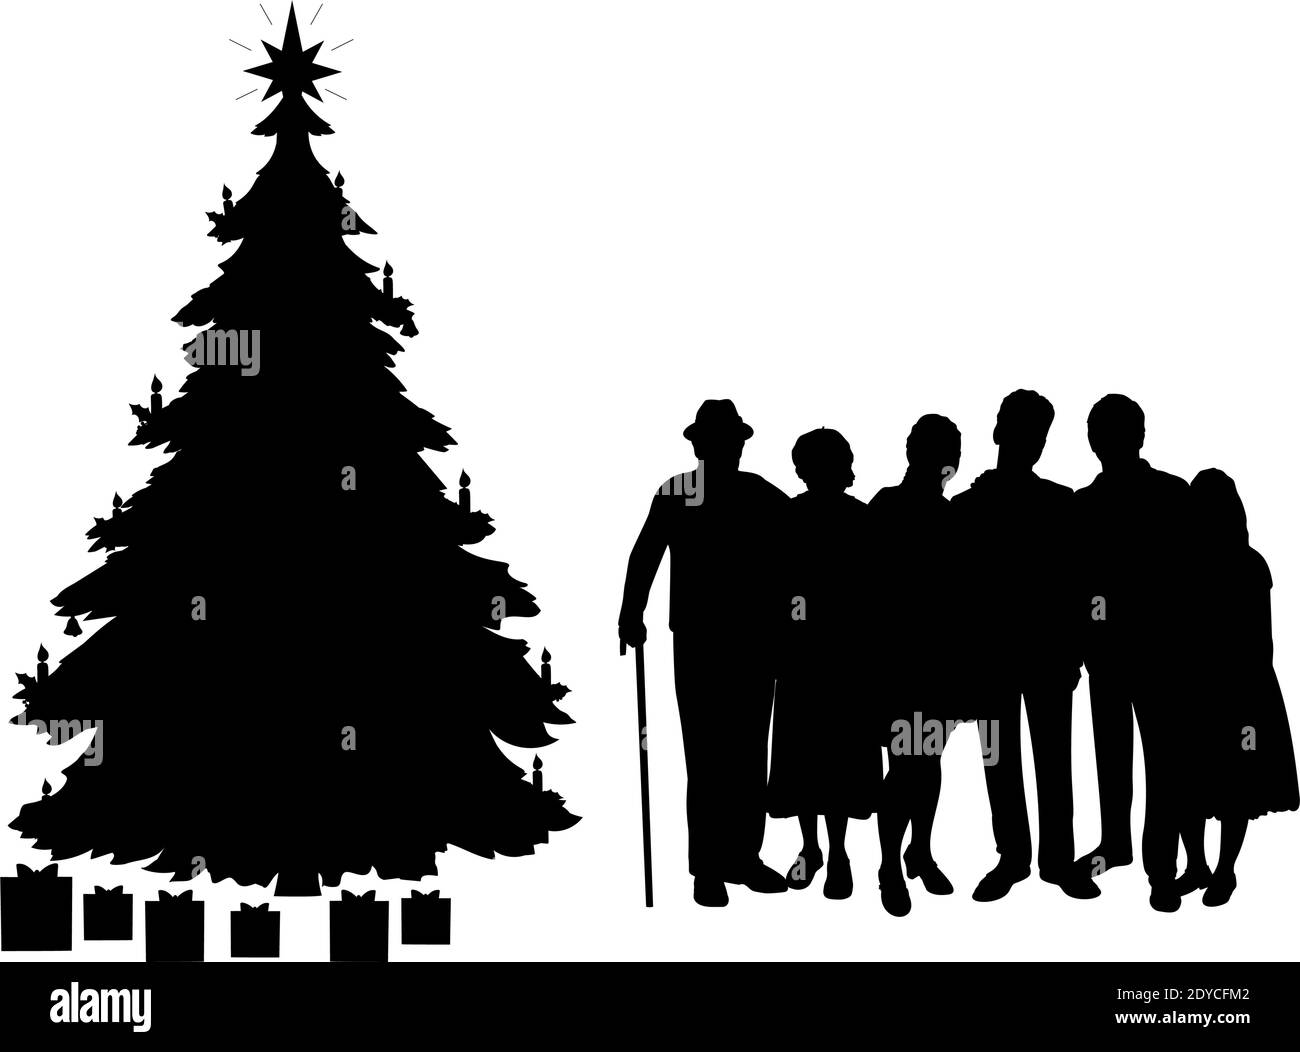 Silhouettes family by the Christmas tree. Christmas holiday. Illustration symbol icon Stock Vector